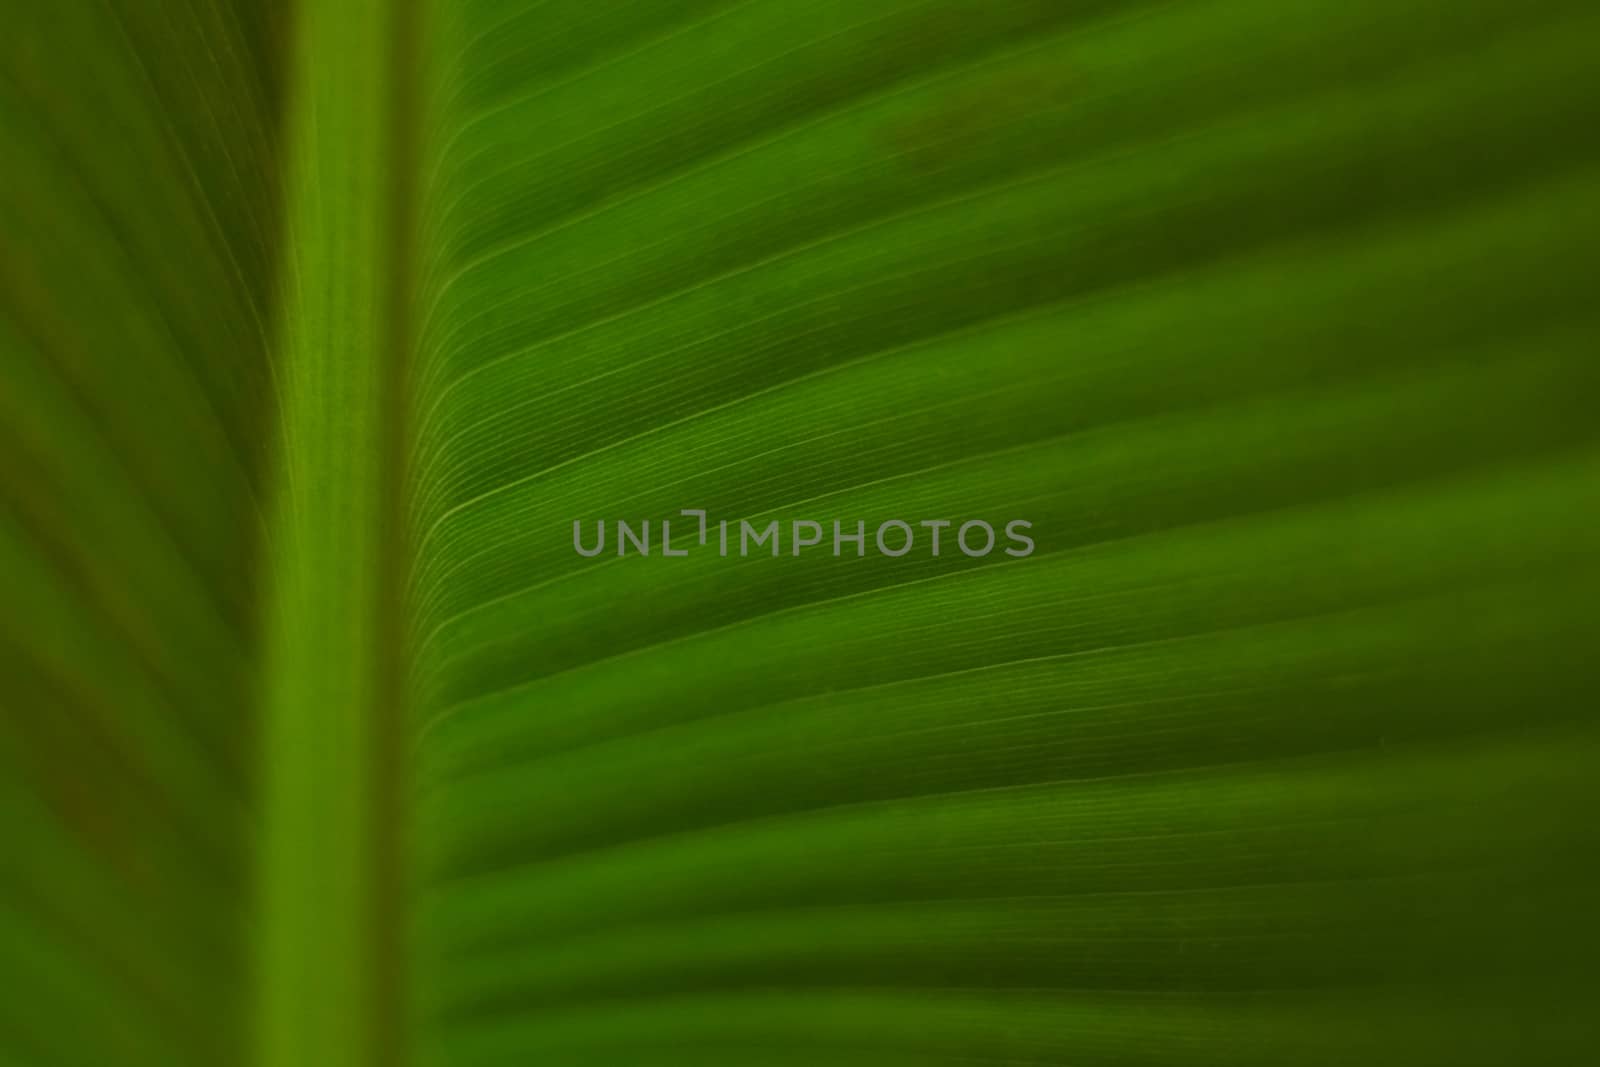 structure of a green leaf